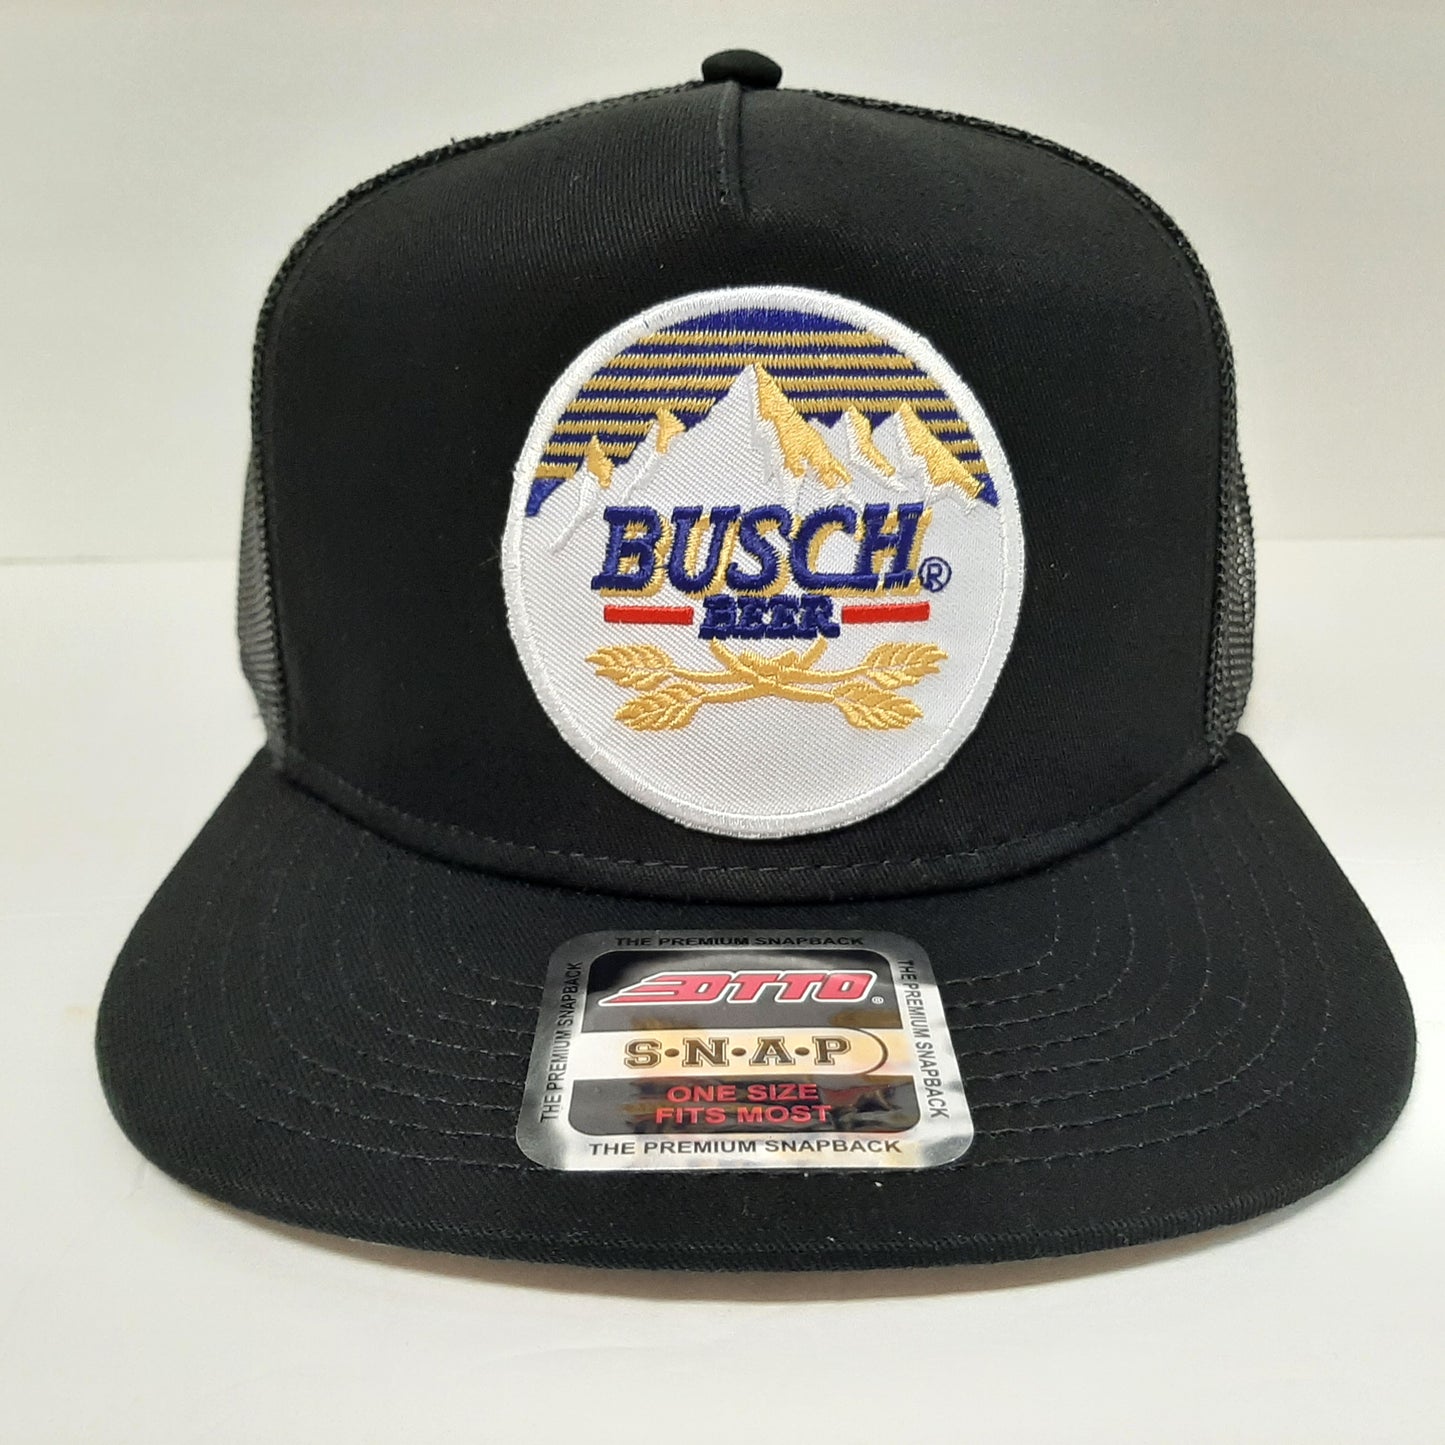 Busch Beer Embroidered Patch Flat Bill Snapback Mesh Hat Cap OTTO